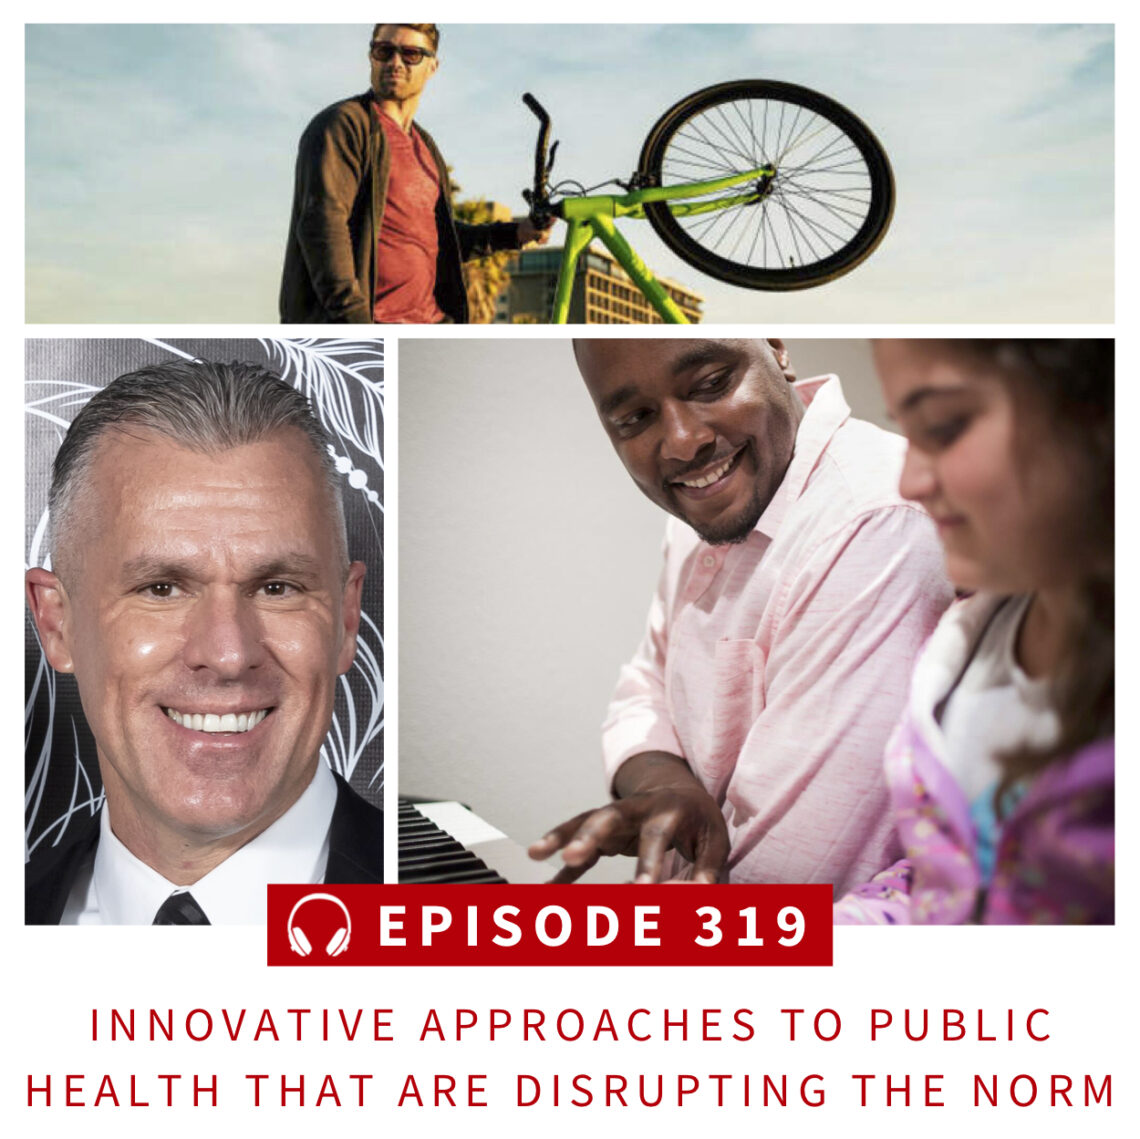 Innovative Approaches to Public Health that are Disrupting the Norm: Affordable Healthcare for Wellness Entrepreneurs, How Music Changes Lives, and Battery-Powered e-Bikes